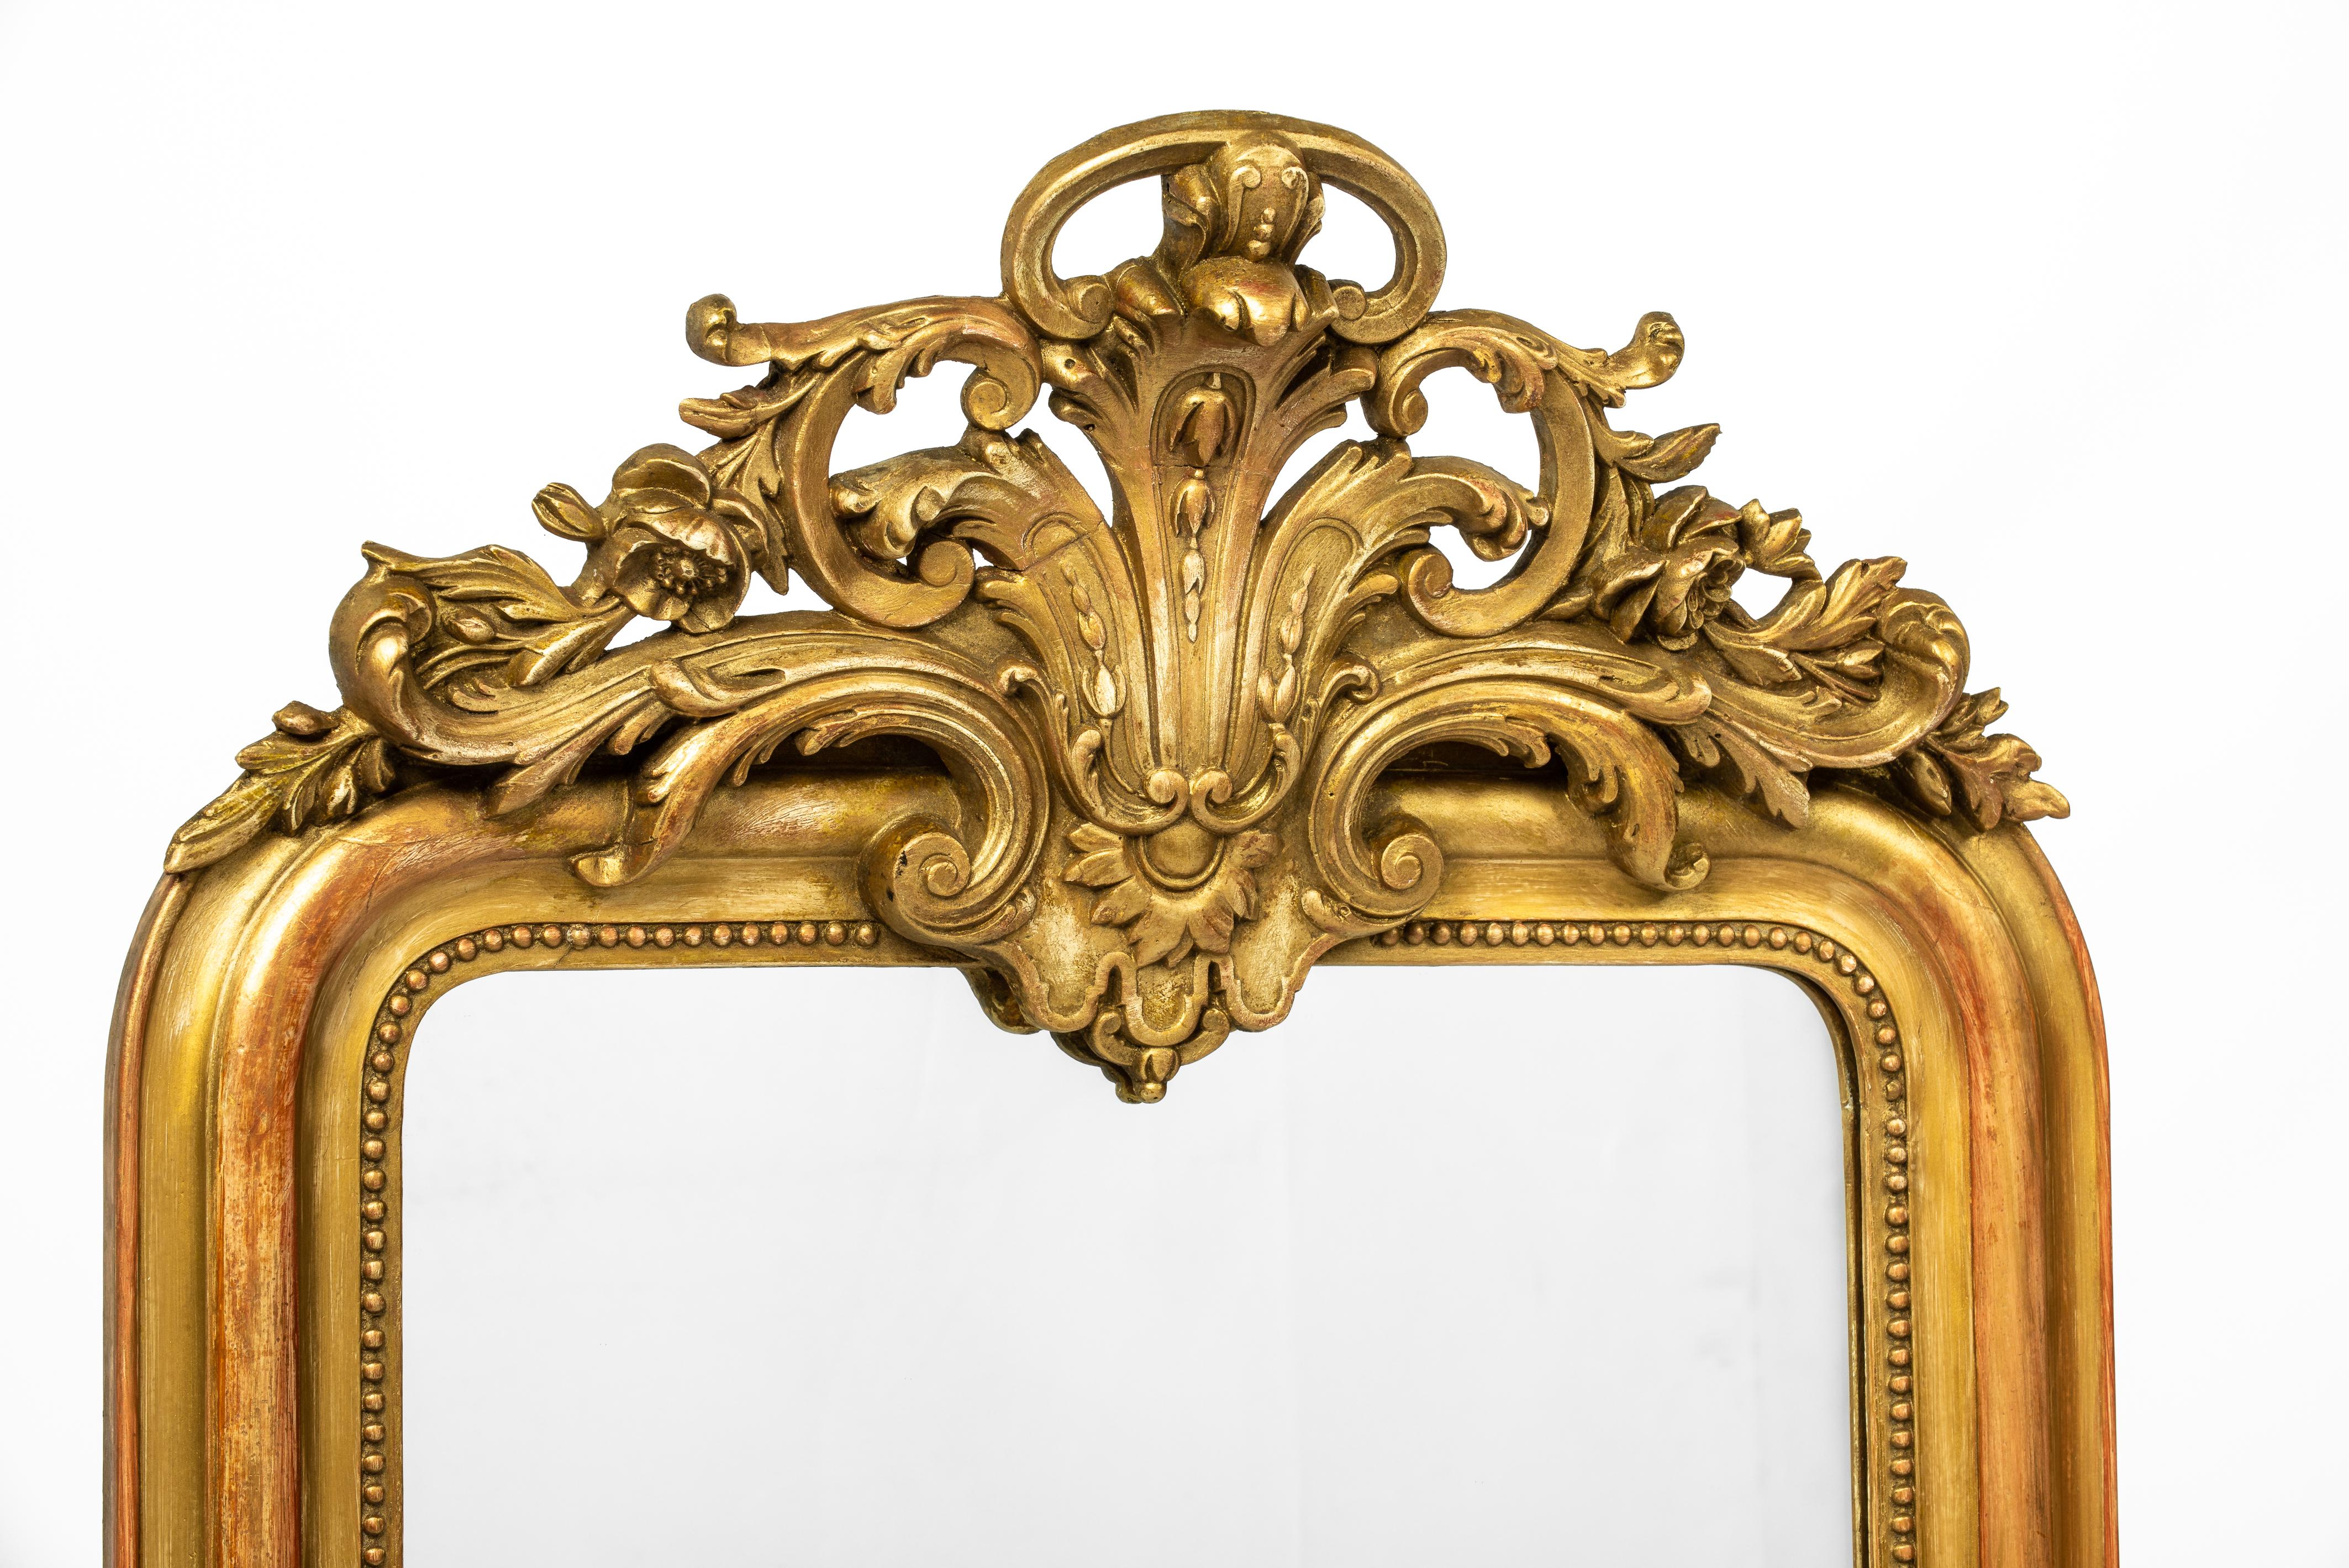 This beautiful antique mirror was made in France around 1880. It is a pure Louis Philippe mirror with its upper rounded corners and elegant frame. The most elevated part and outer mould of the frame have a red bole undercoat, while the rest of the